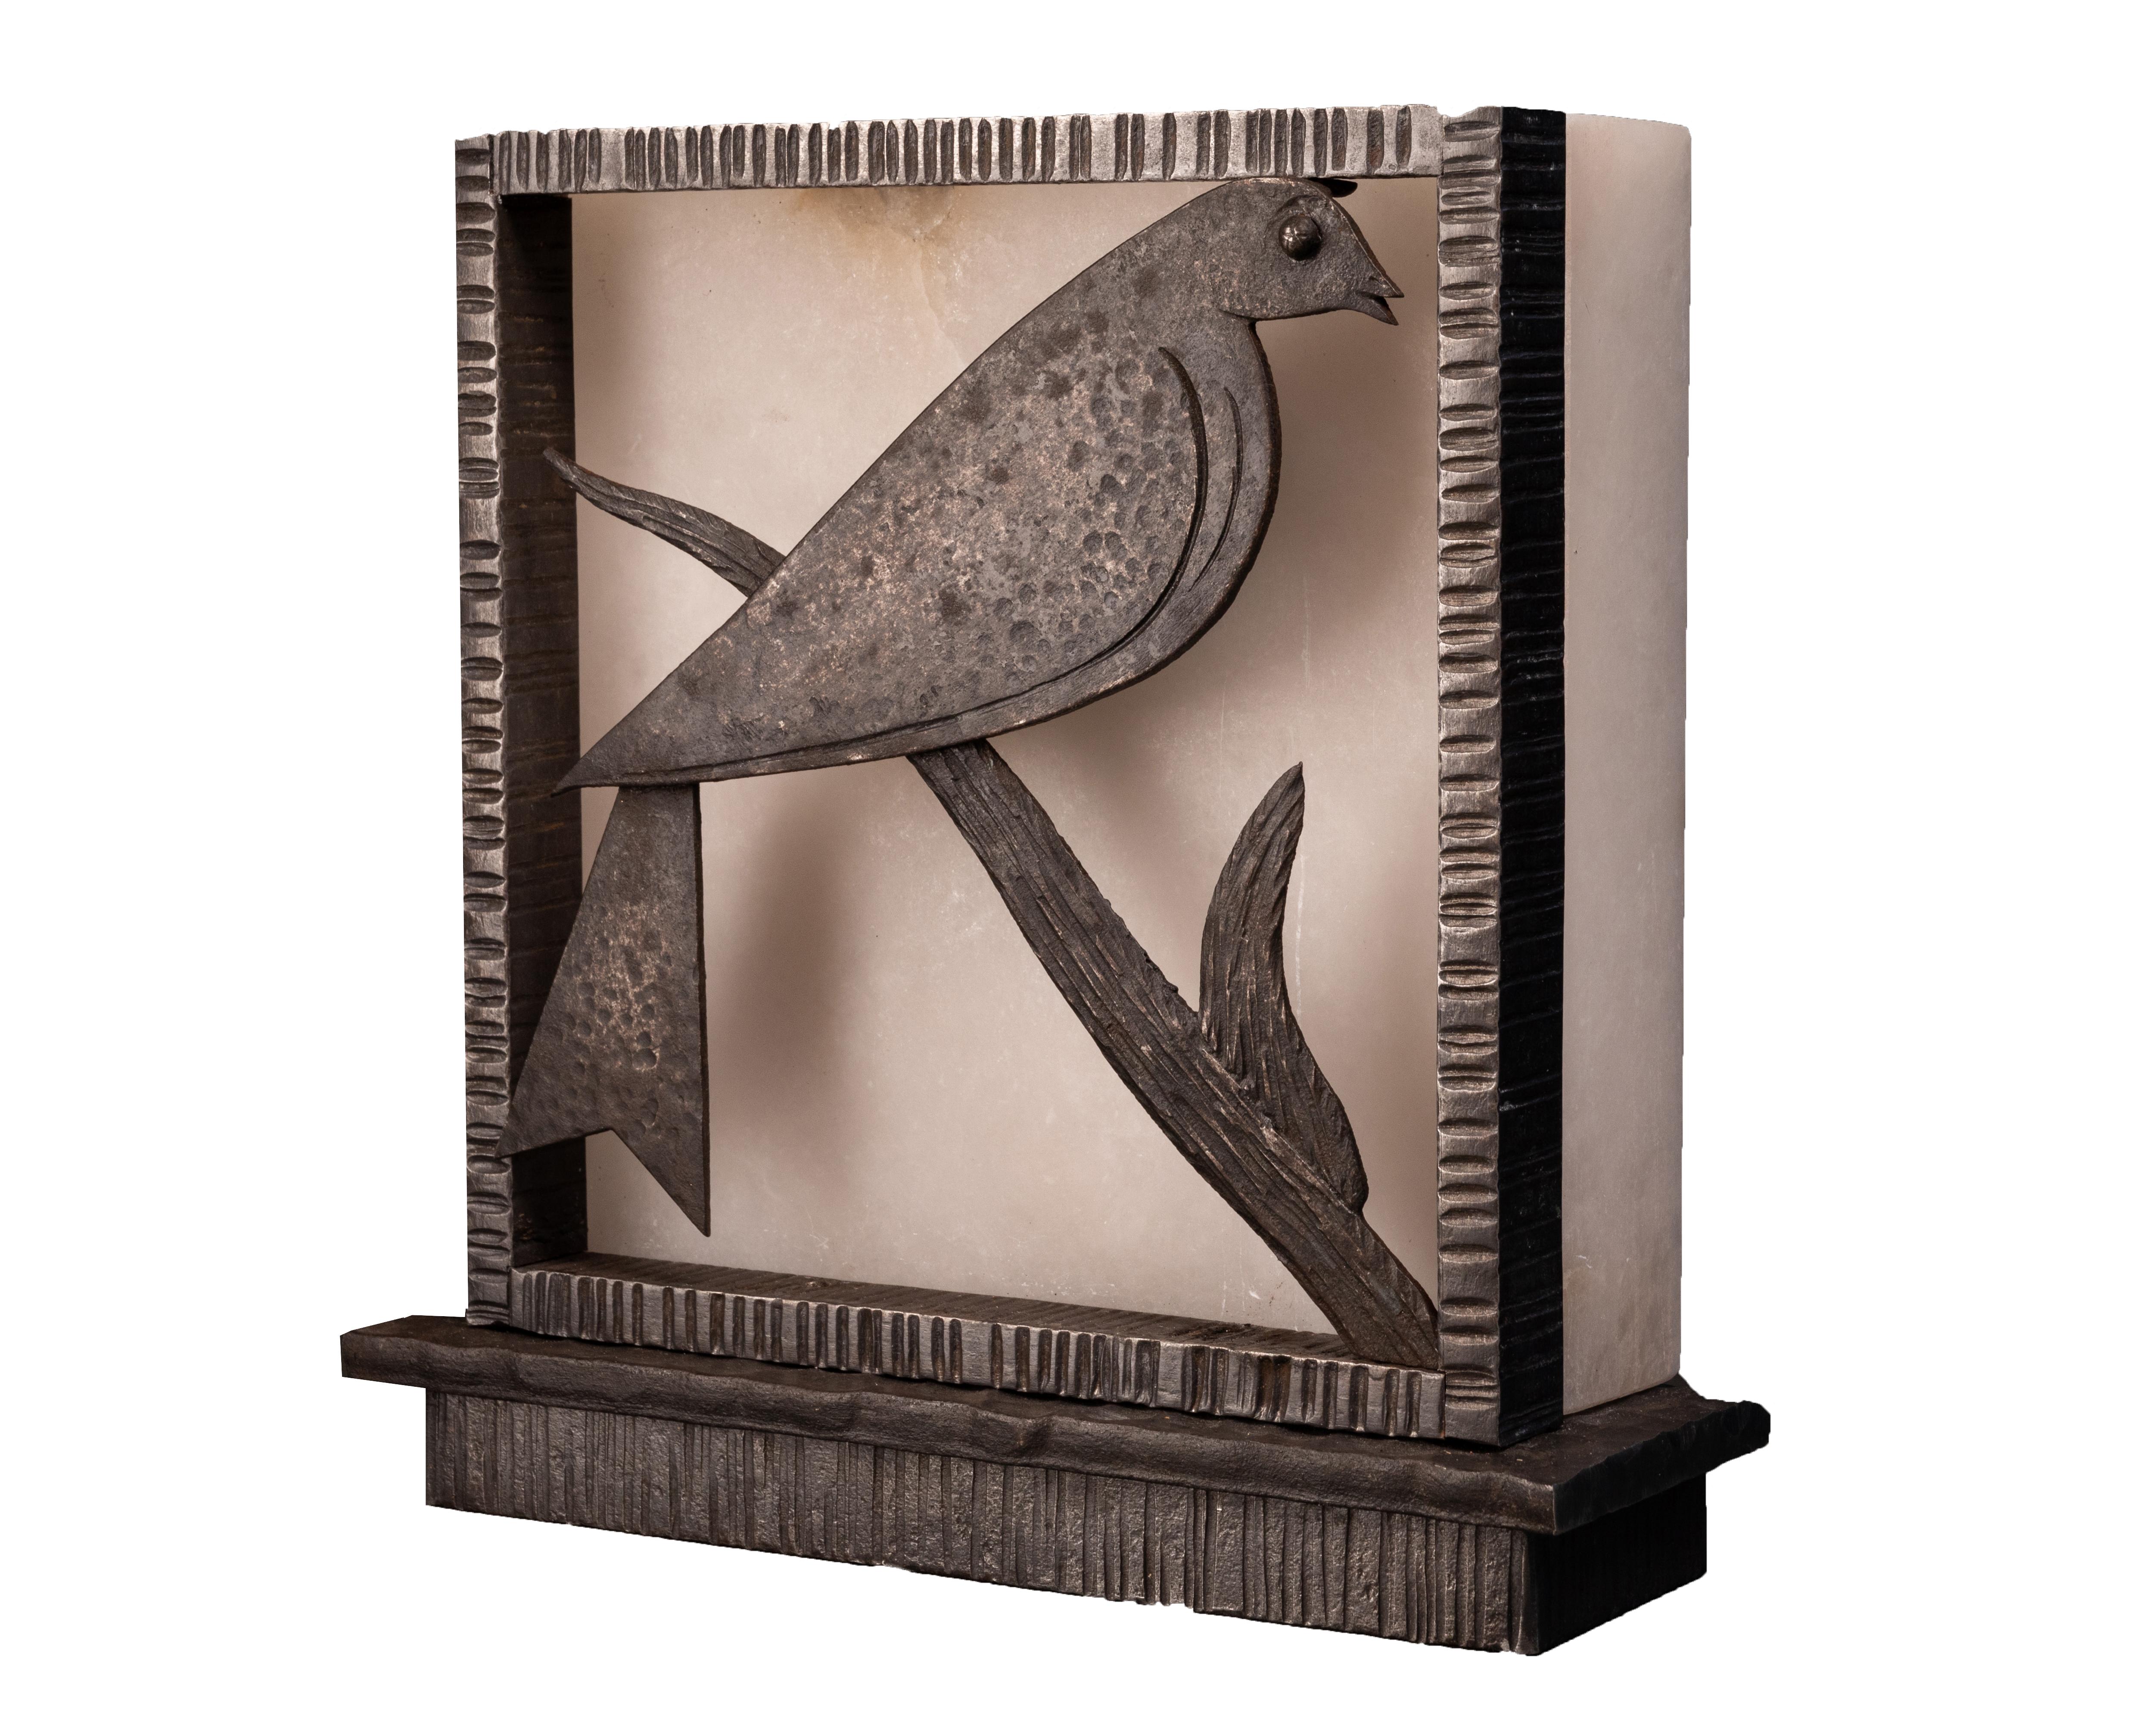 Art Deco dove lamp or sconce in wrought iron and alabaster by Edgar Brandt (more about the artist below).

Animal sculpture Art Deco lamp (or wall lamp) decorated with a dove in hammered and chiseled wrought iron.

A contemporary alabaster box